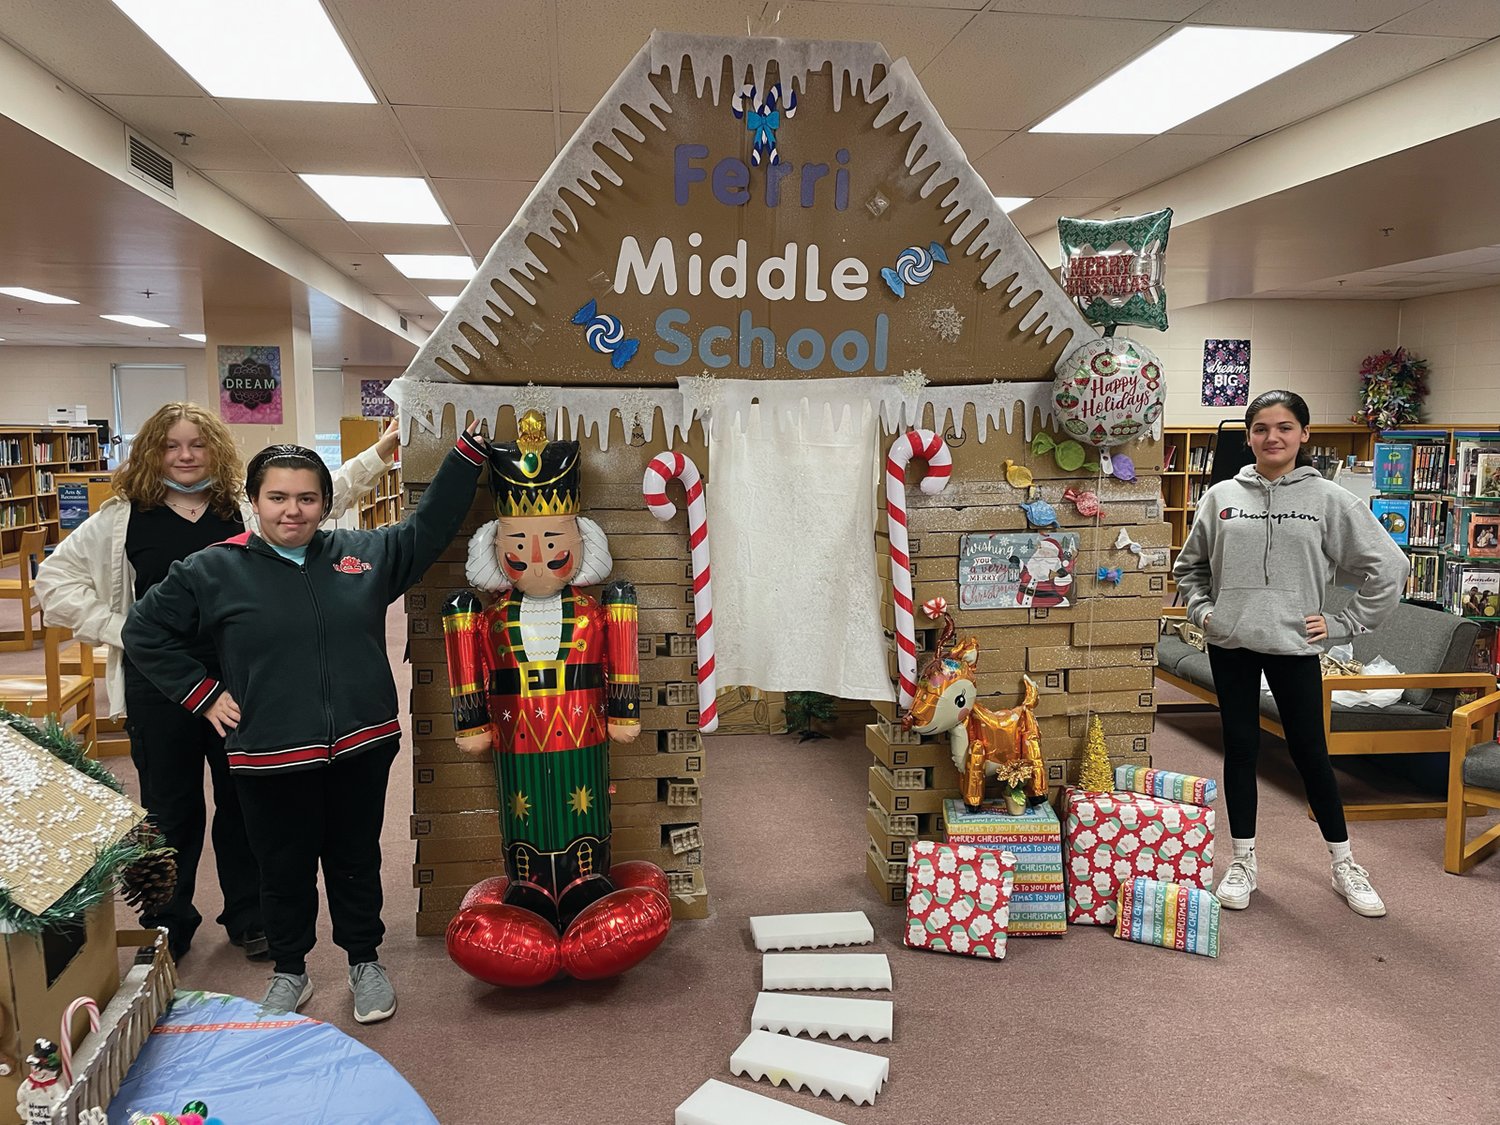 GINGERBREAD GENIUSES: Saylor Pizzi, Katelyn Silva, and Harliey Jimenez pose with the giant gingerbread house they helped build in the Ferri Middle School library.